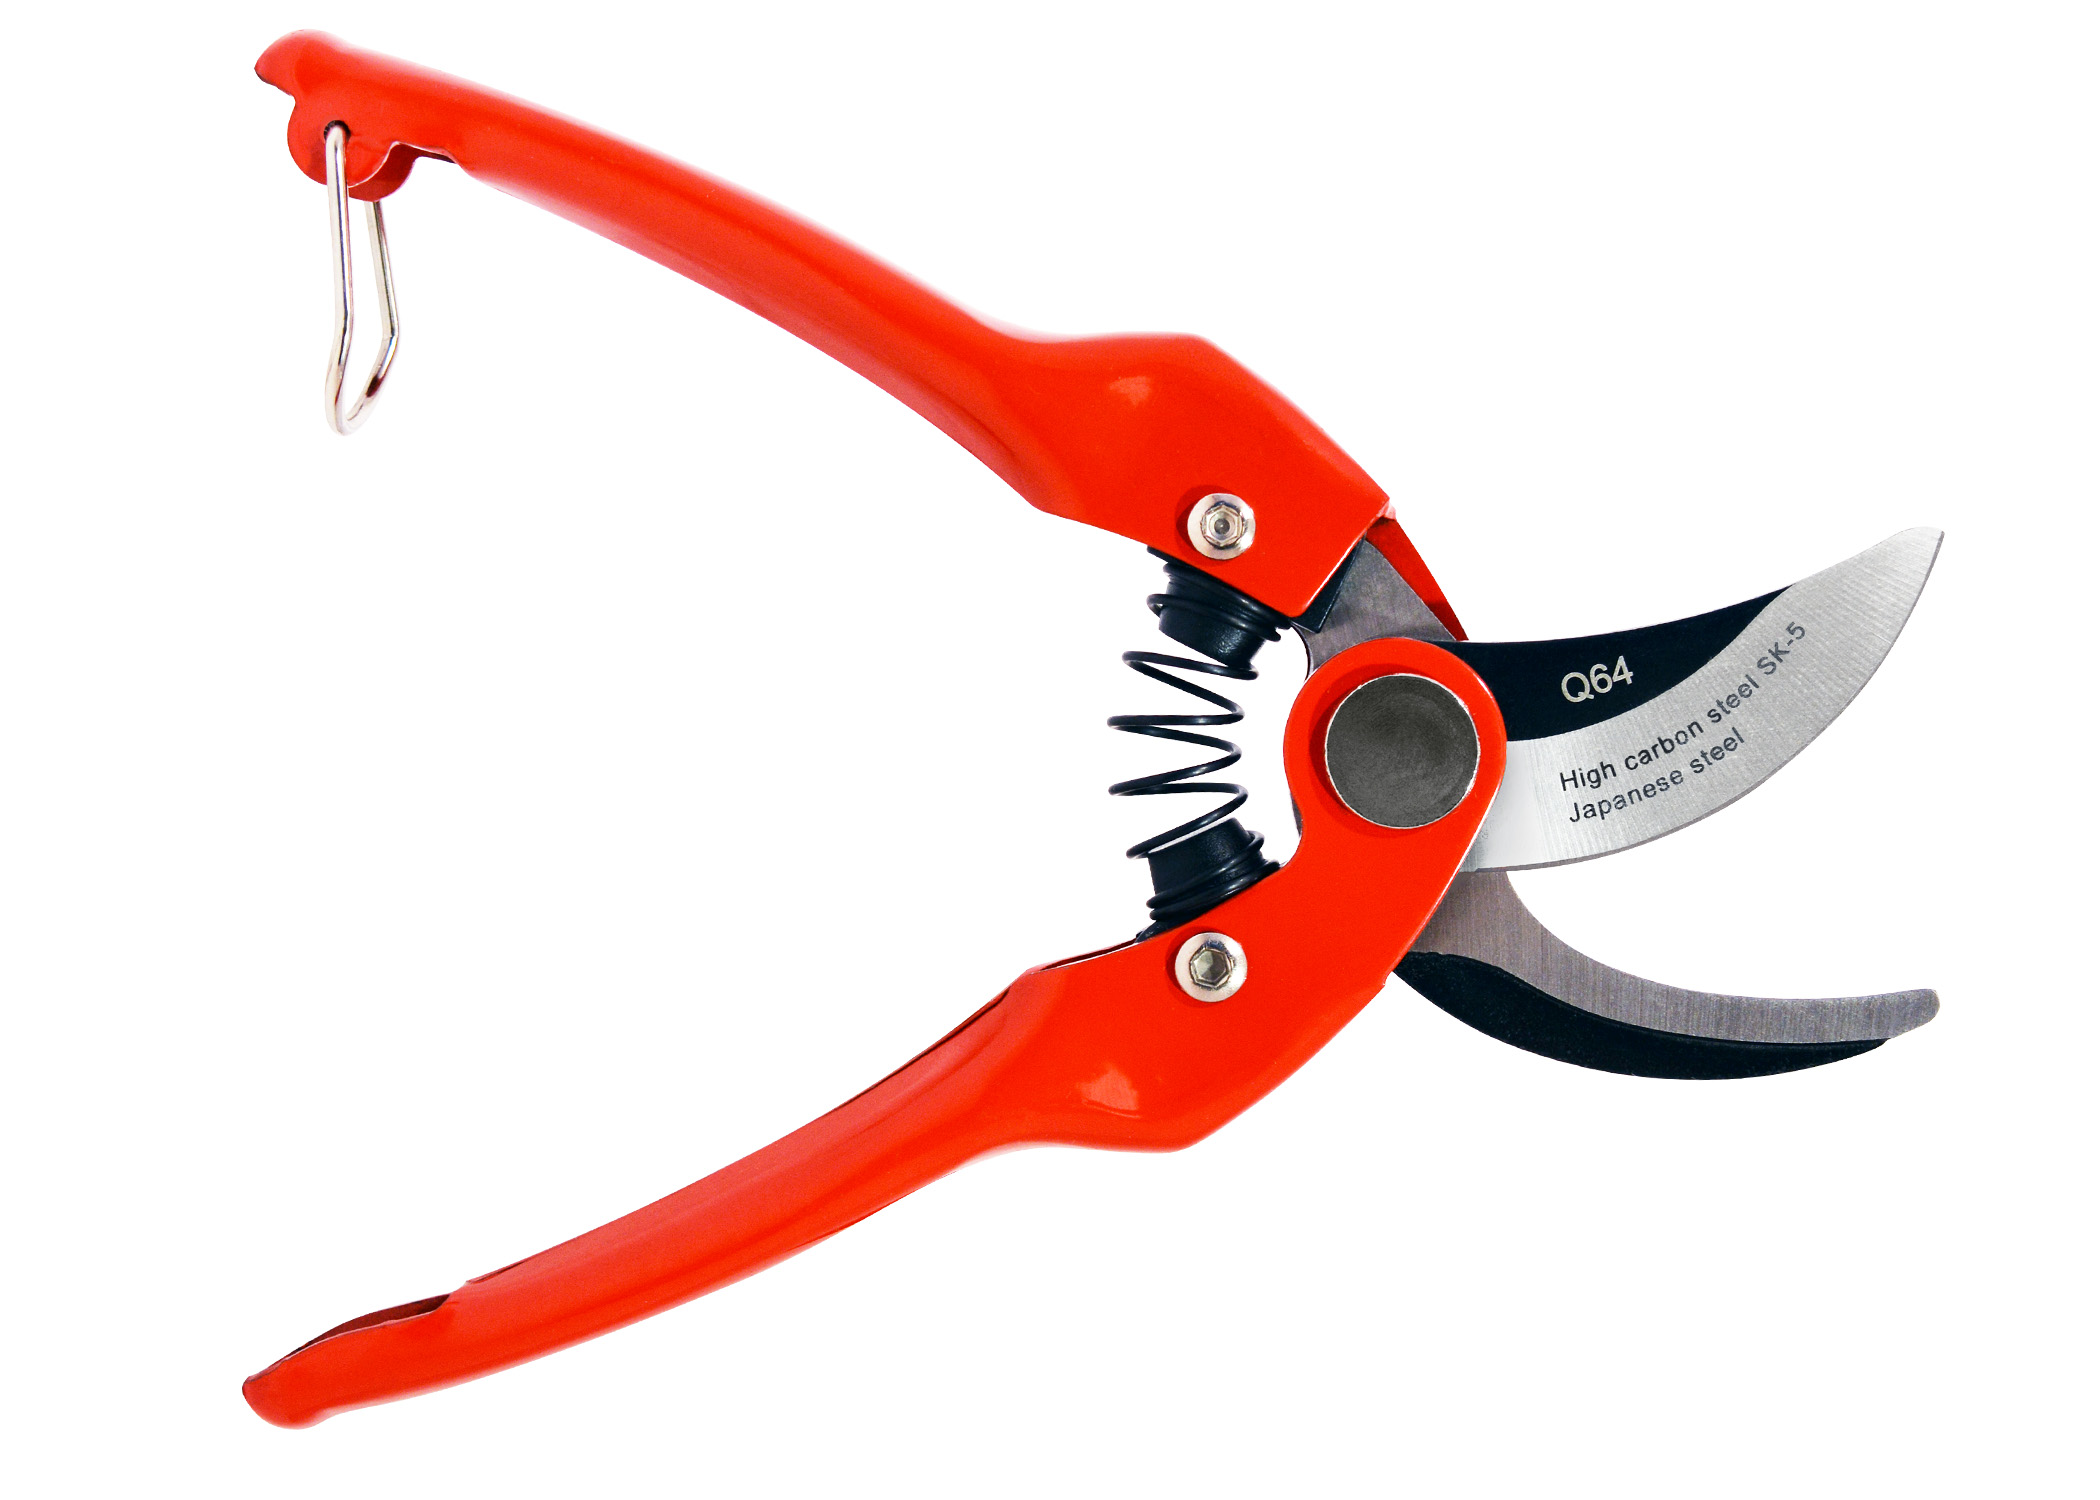 Zenport Q64 Pruner Heavy Duty Professional, SK5 Japanese Steel Cutting Blade, .75-Inch Cut, 7-Inch Long - Click Image to Close